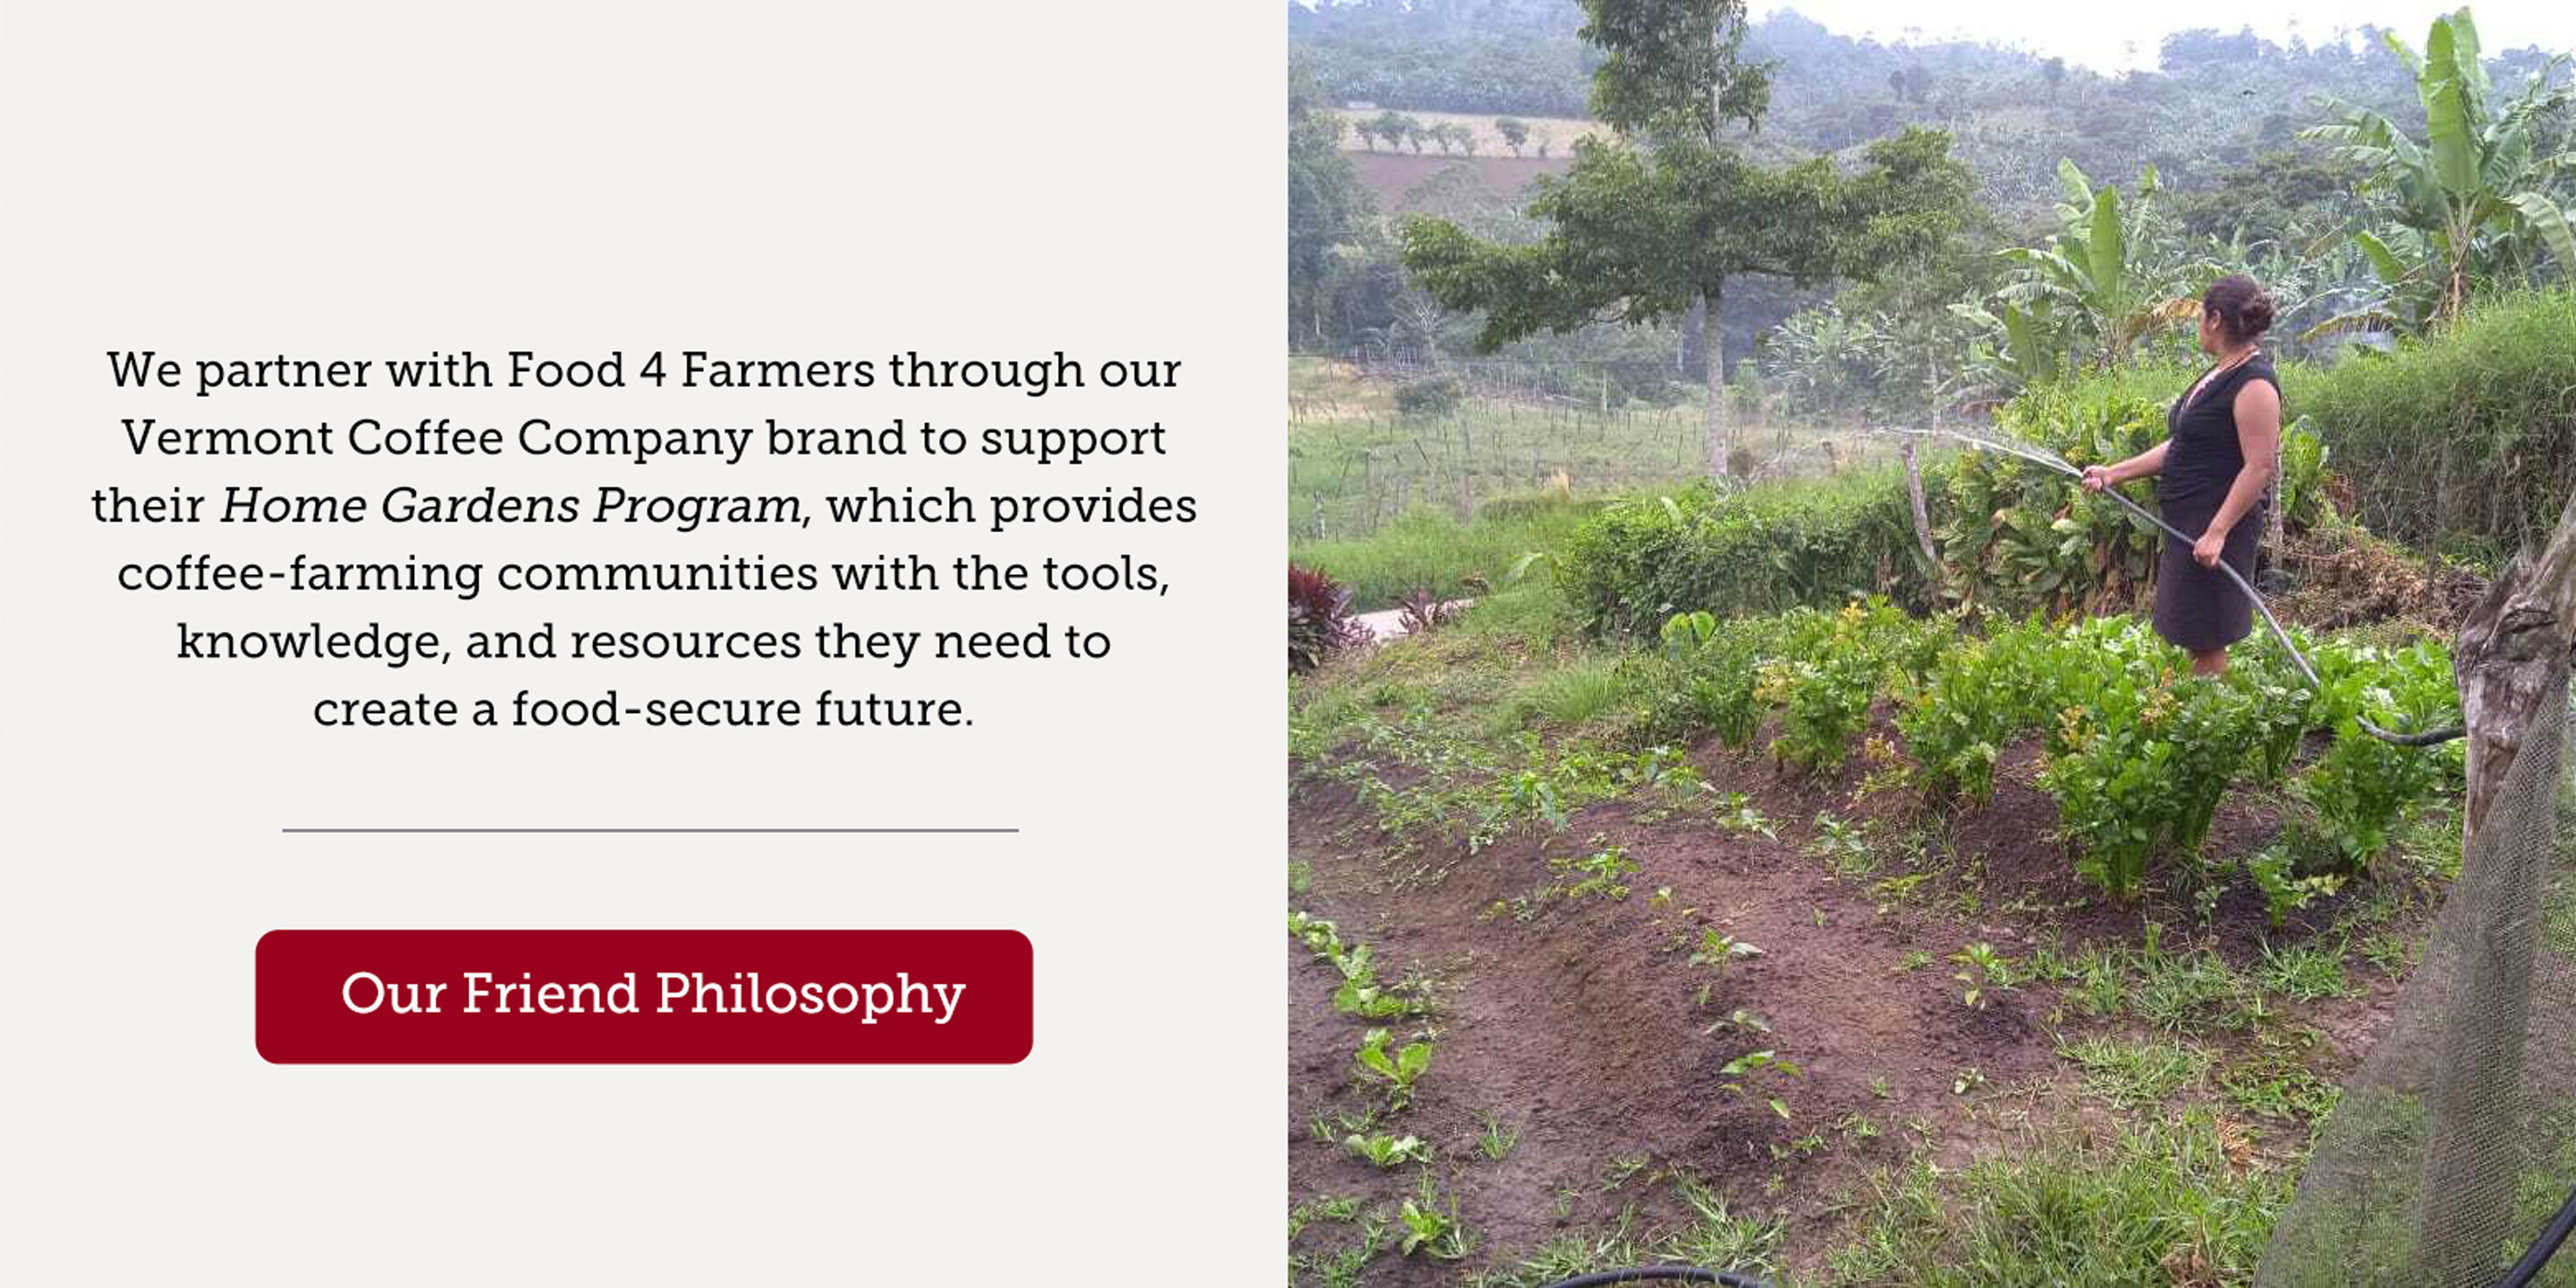 We partner with Food 4 Farmers through our Vermont Coffee Company brand to support their Home Gardens program, which provides coffee farming communities with the tools, knowledge and resources they need to create a food-secure future. Learn more here: | Our Friend Philosophy